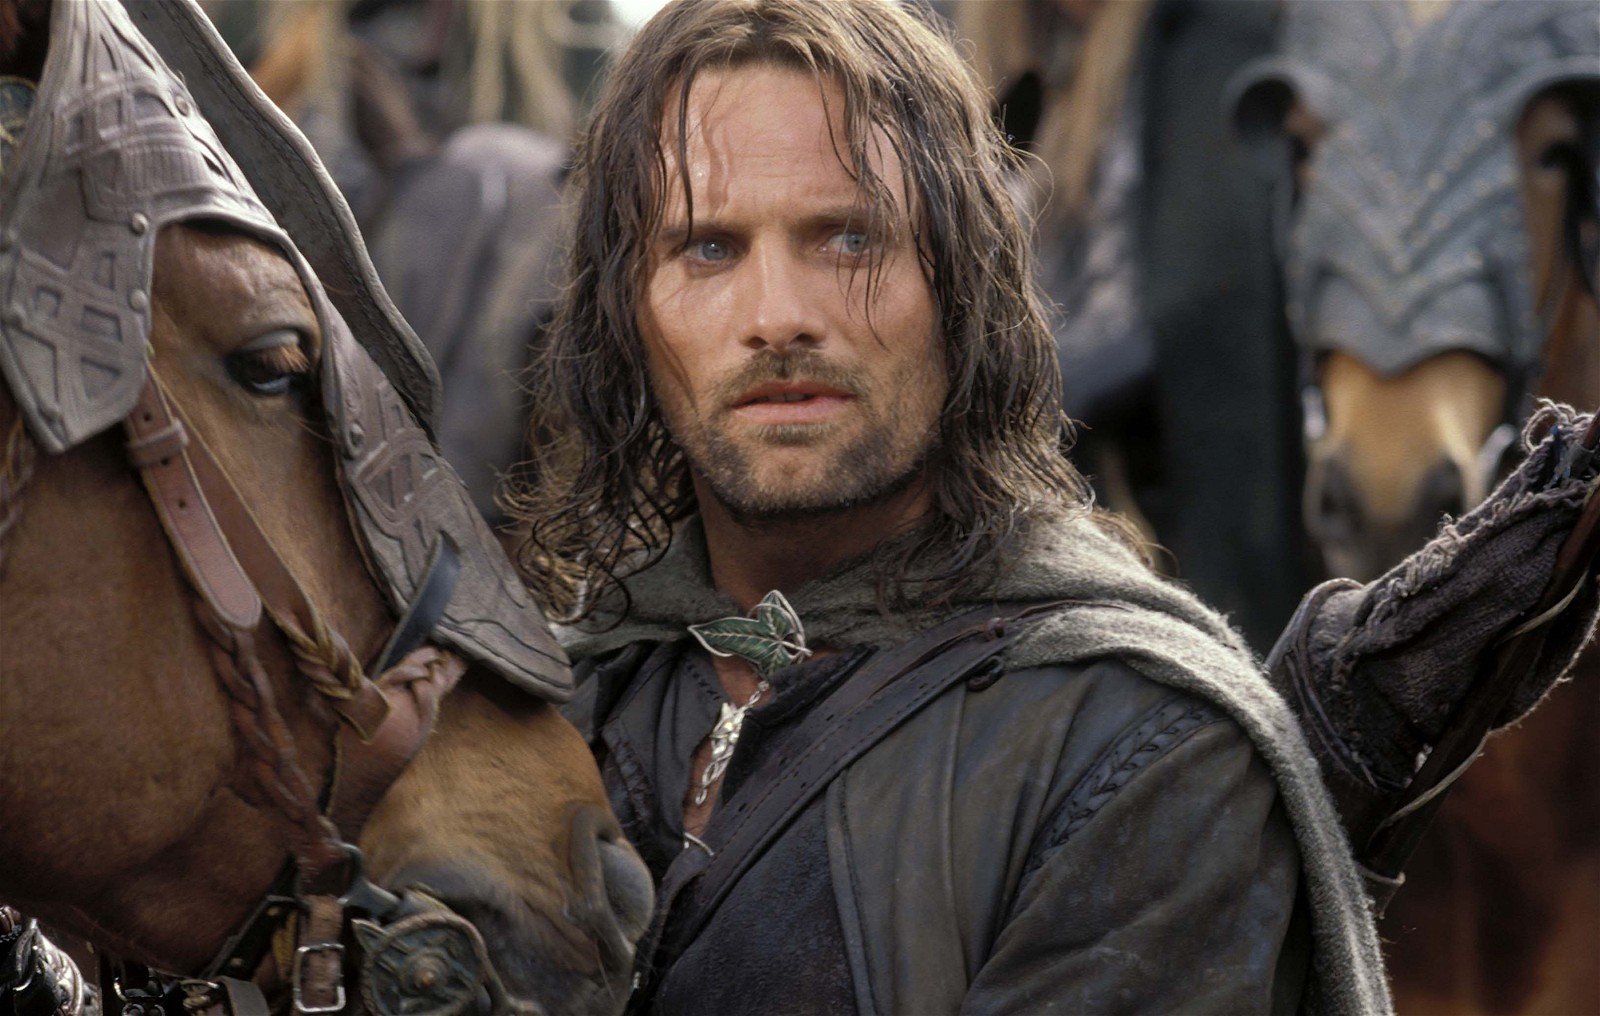 Viggo Mortensen as Aragorn in The Lord of the Rings franchise.